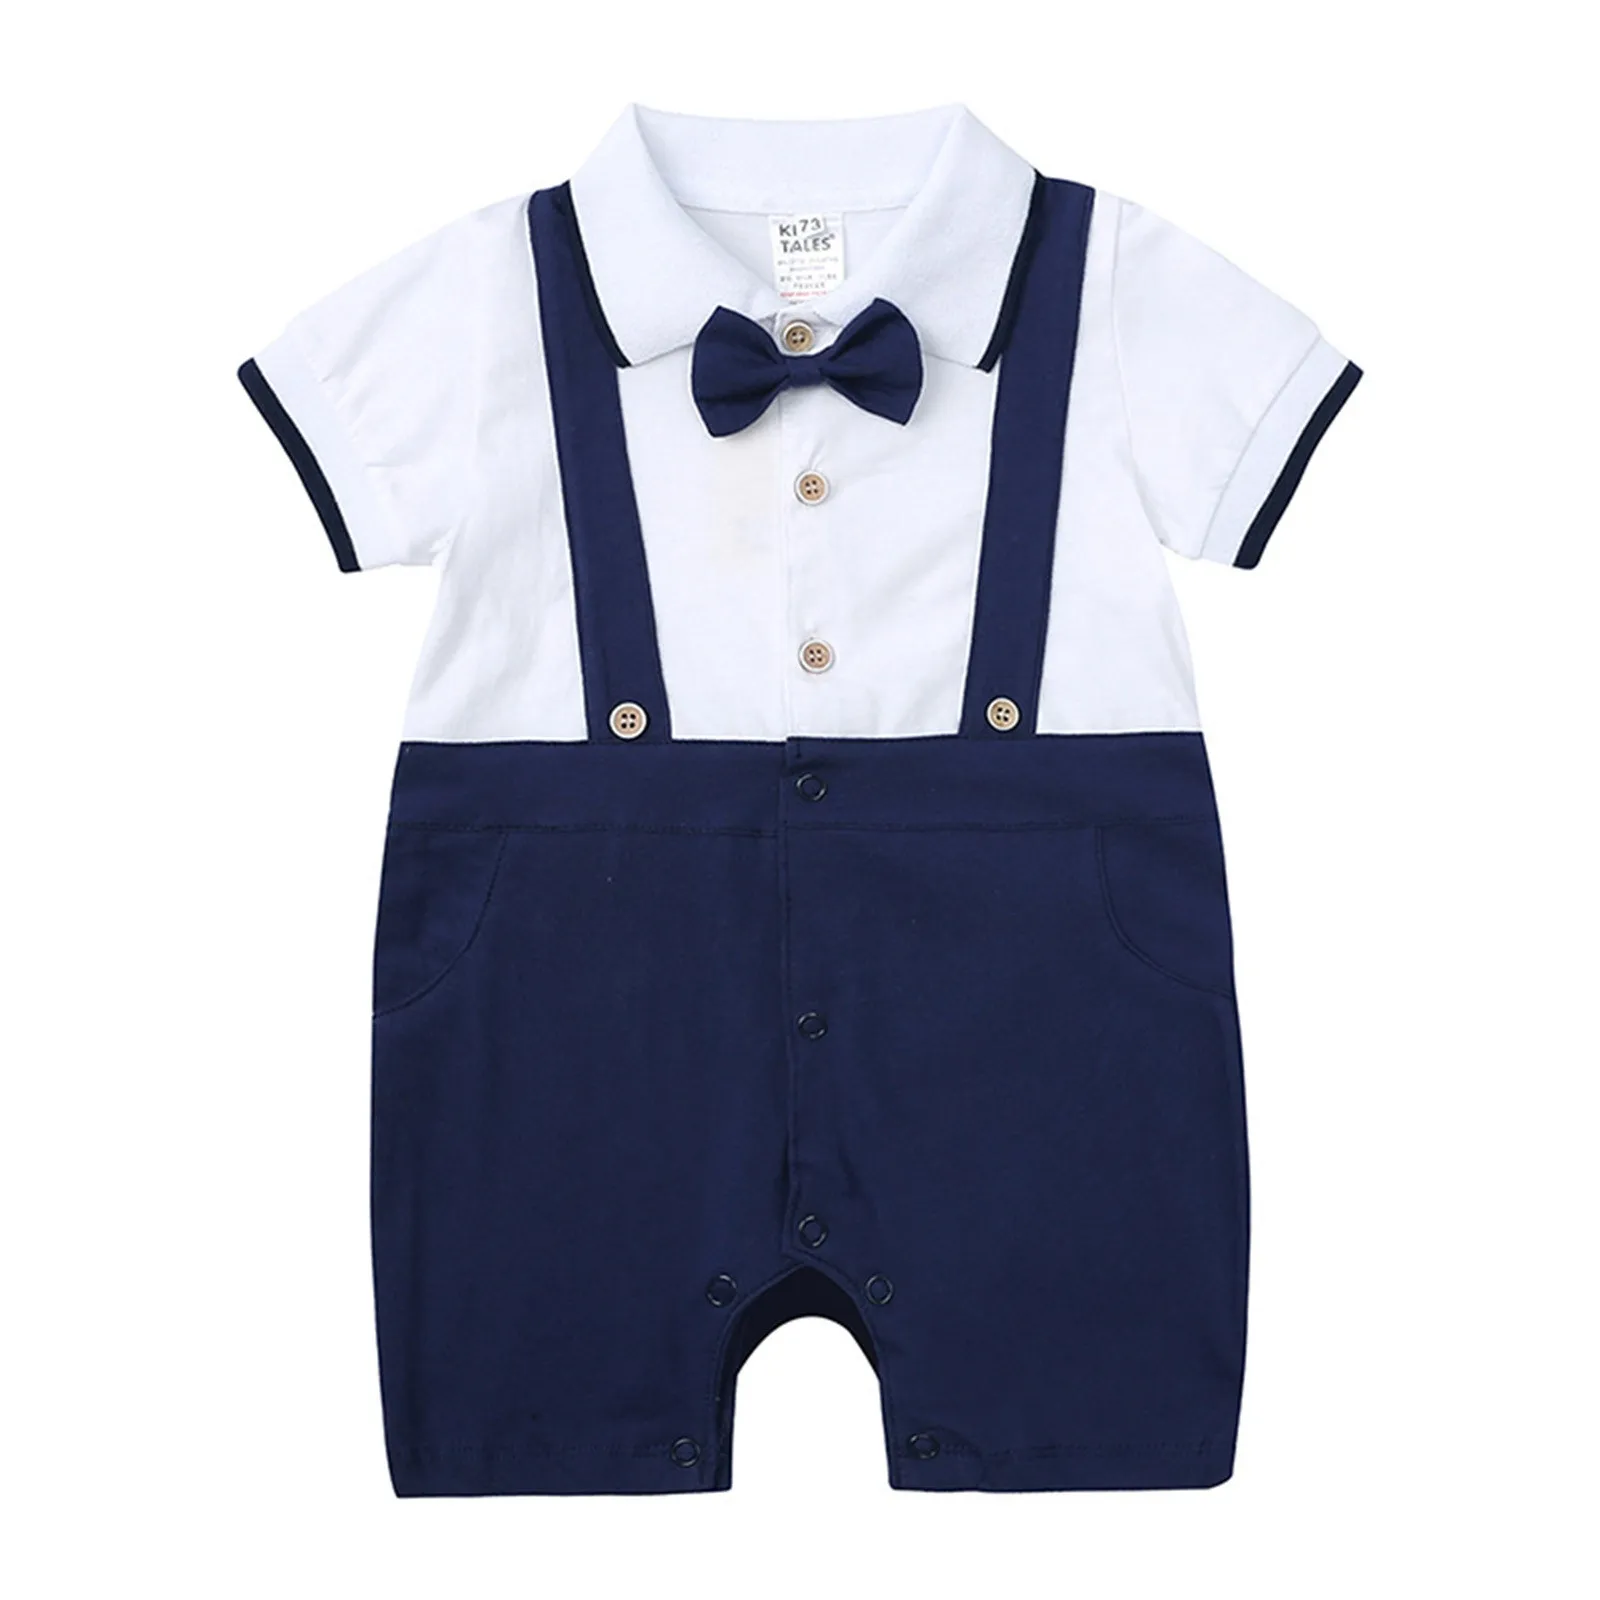 

Infant Newborn Baby Boys Rompers Birthday Party Outfits Gentleman Suit Bow Tie Romper Short Sleeve Jumpsuit Clothes 3 6 12 24M